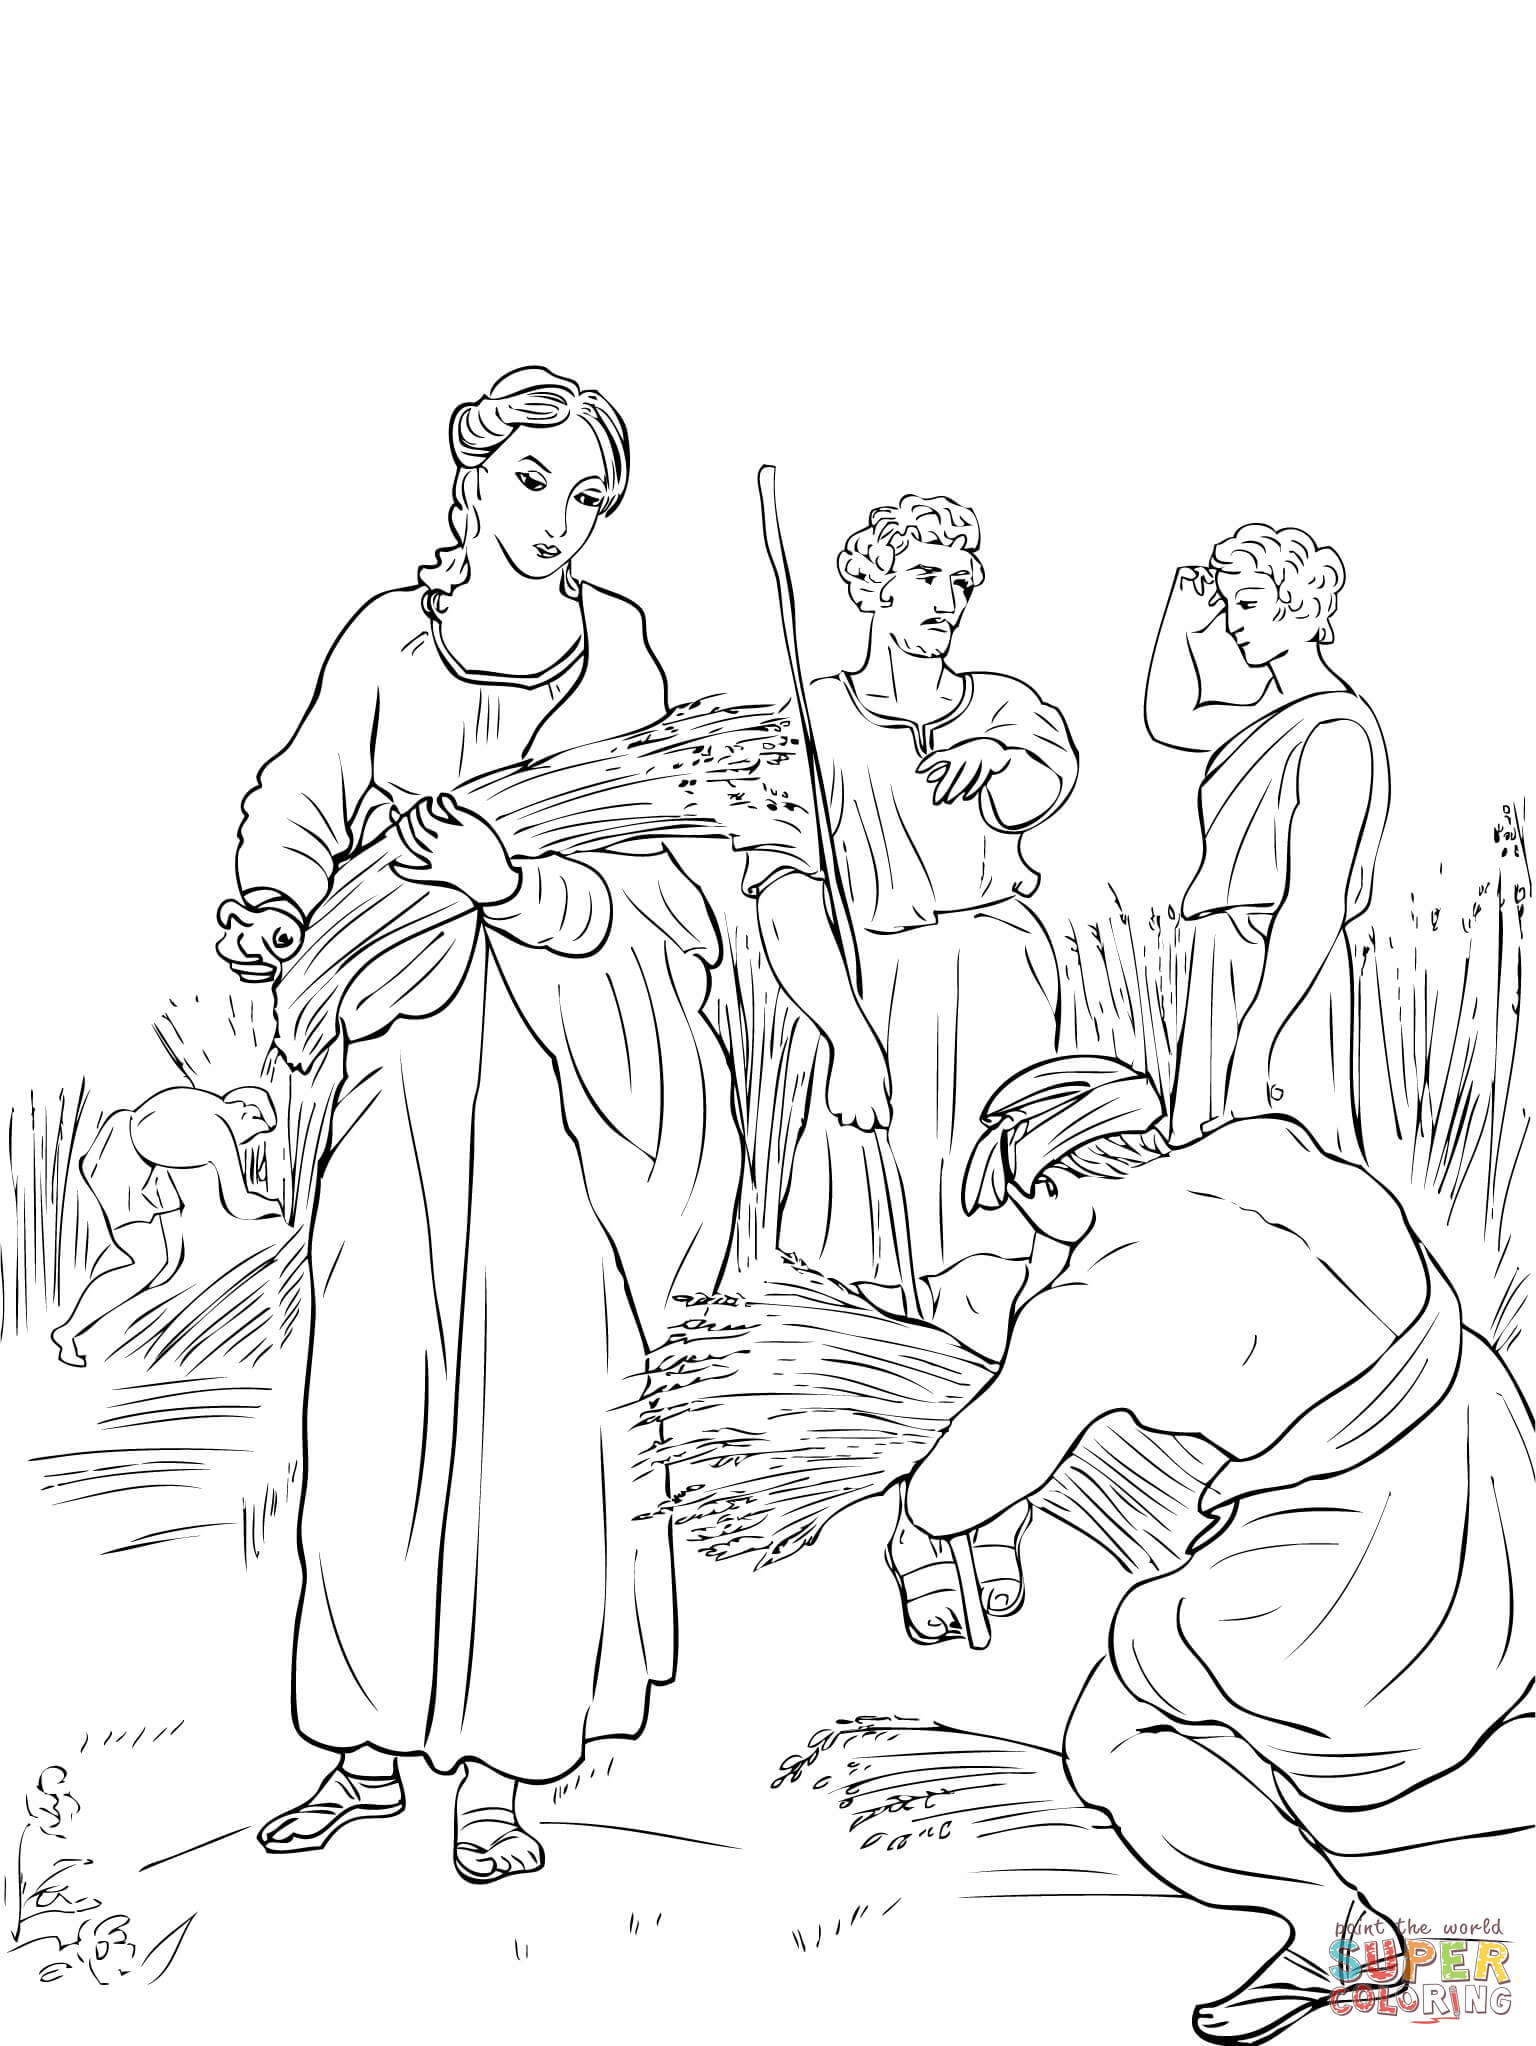 Ruth working in the fields coloring page free printable coloring pages